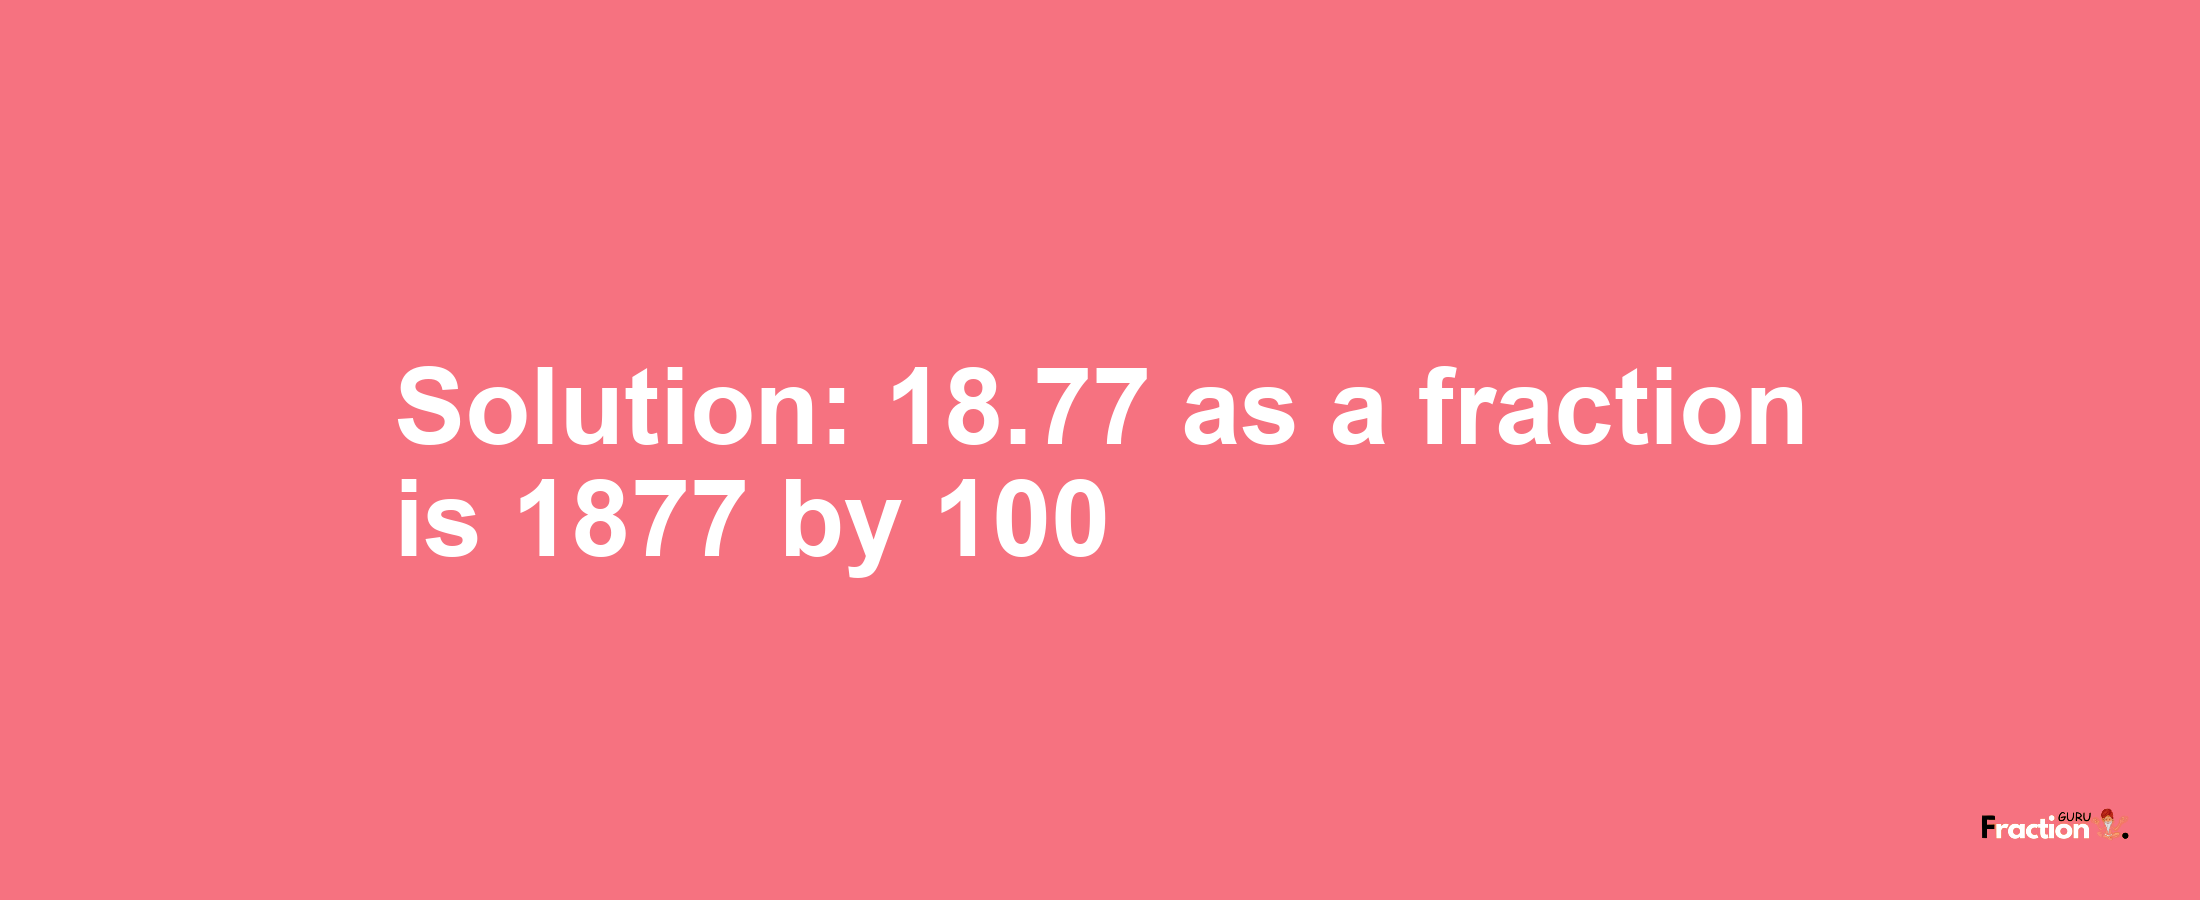 Solution:18.77 as a fraction is 1877/100